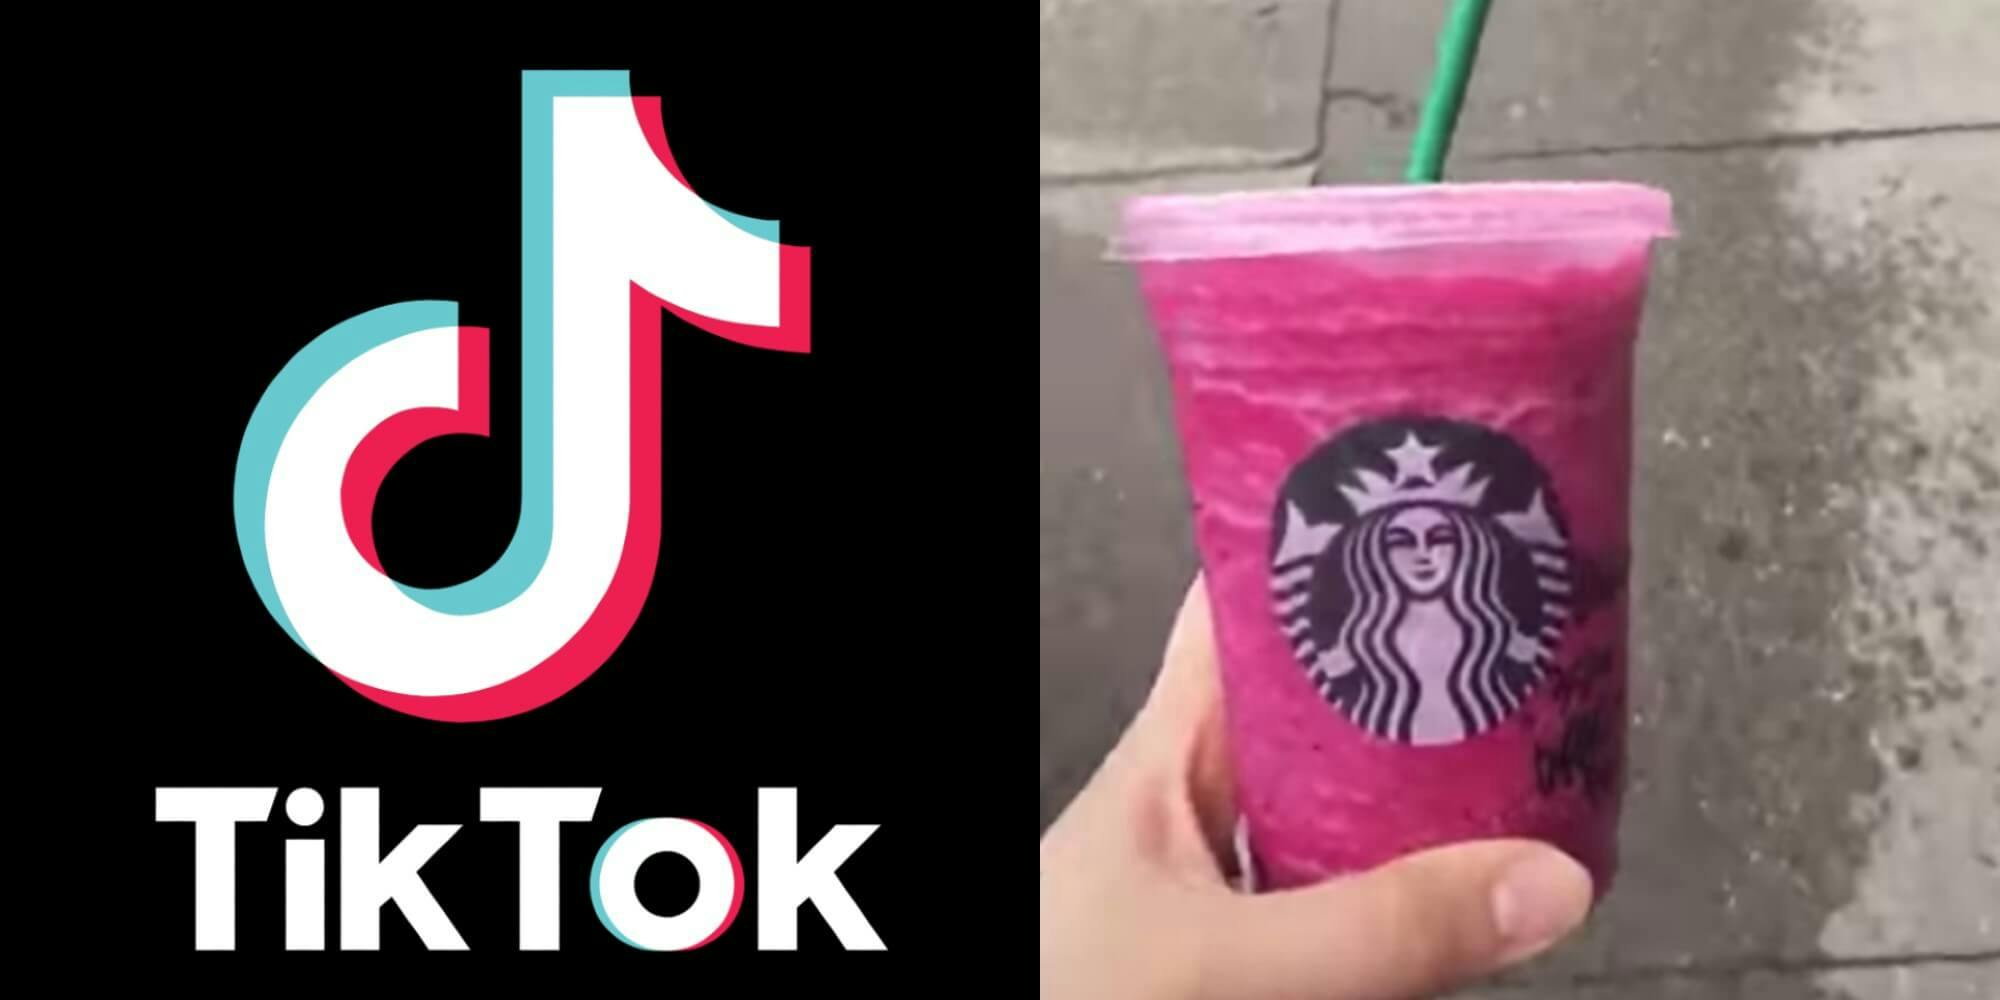 What Is the TikTok Drink? The Popular Meme Drink Is Real